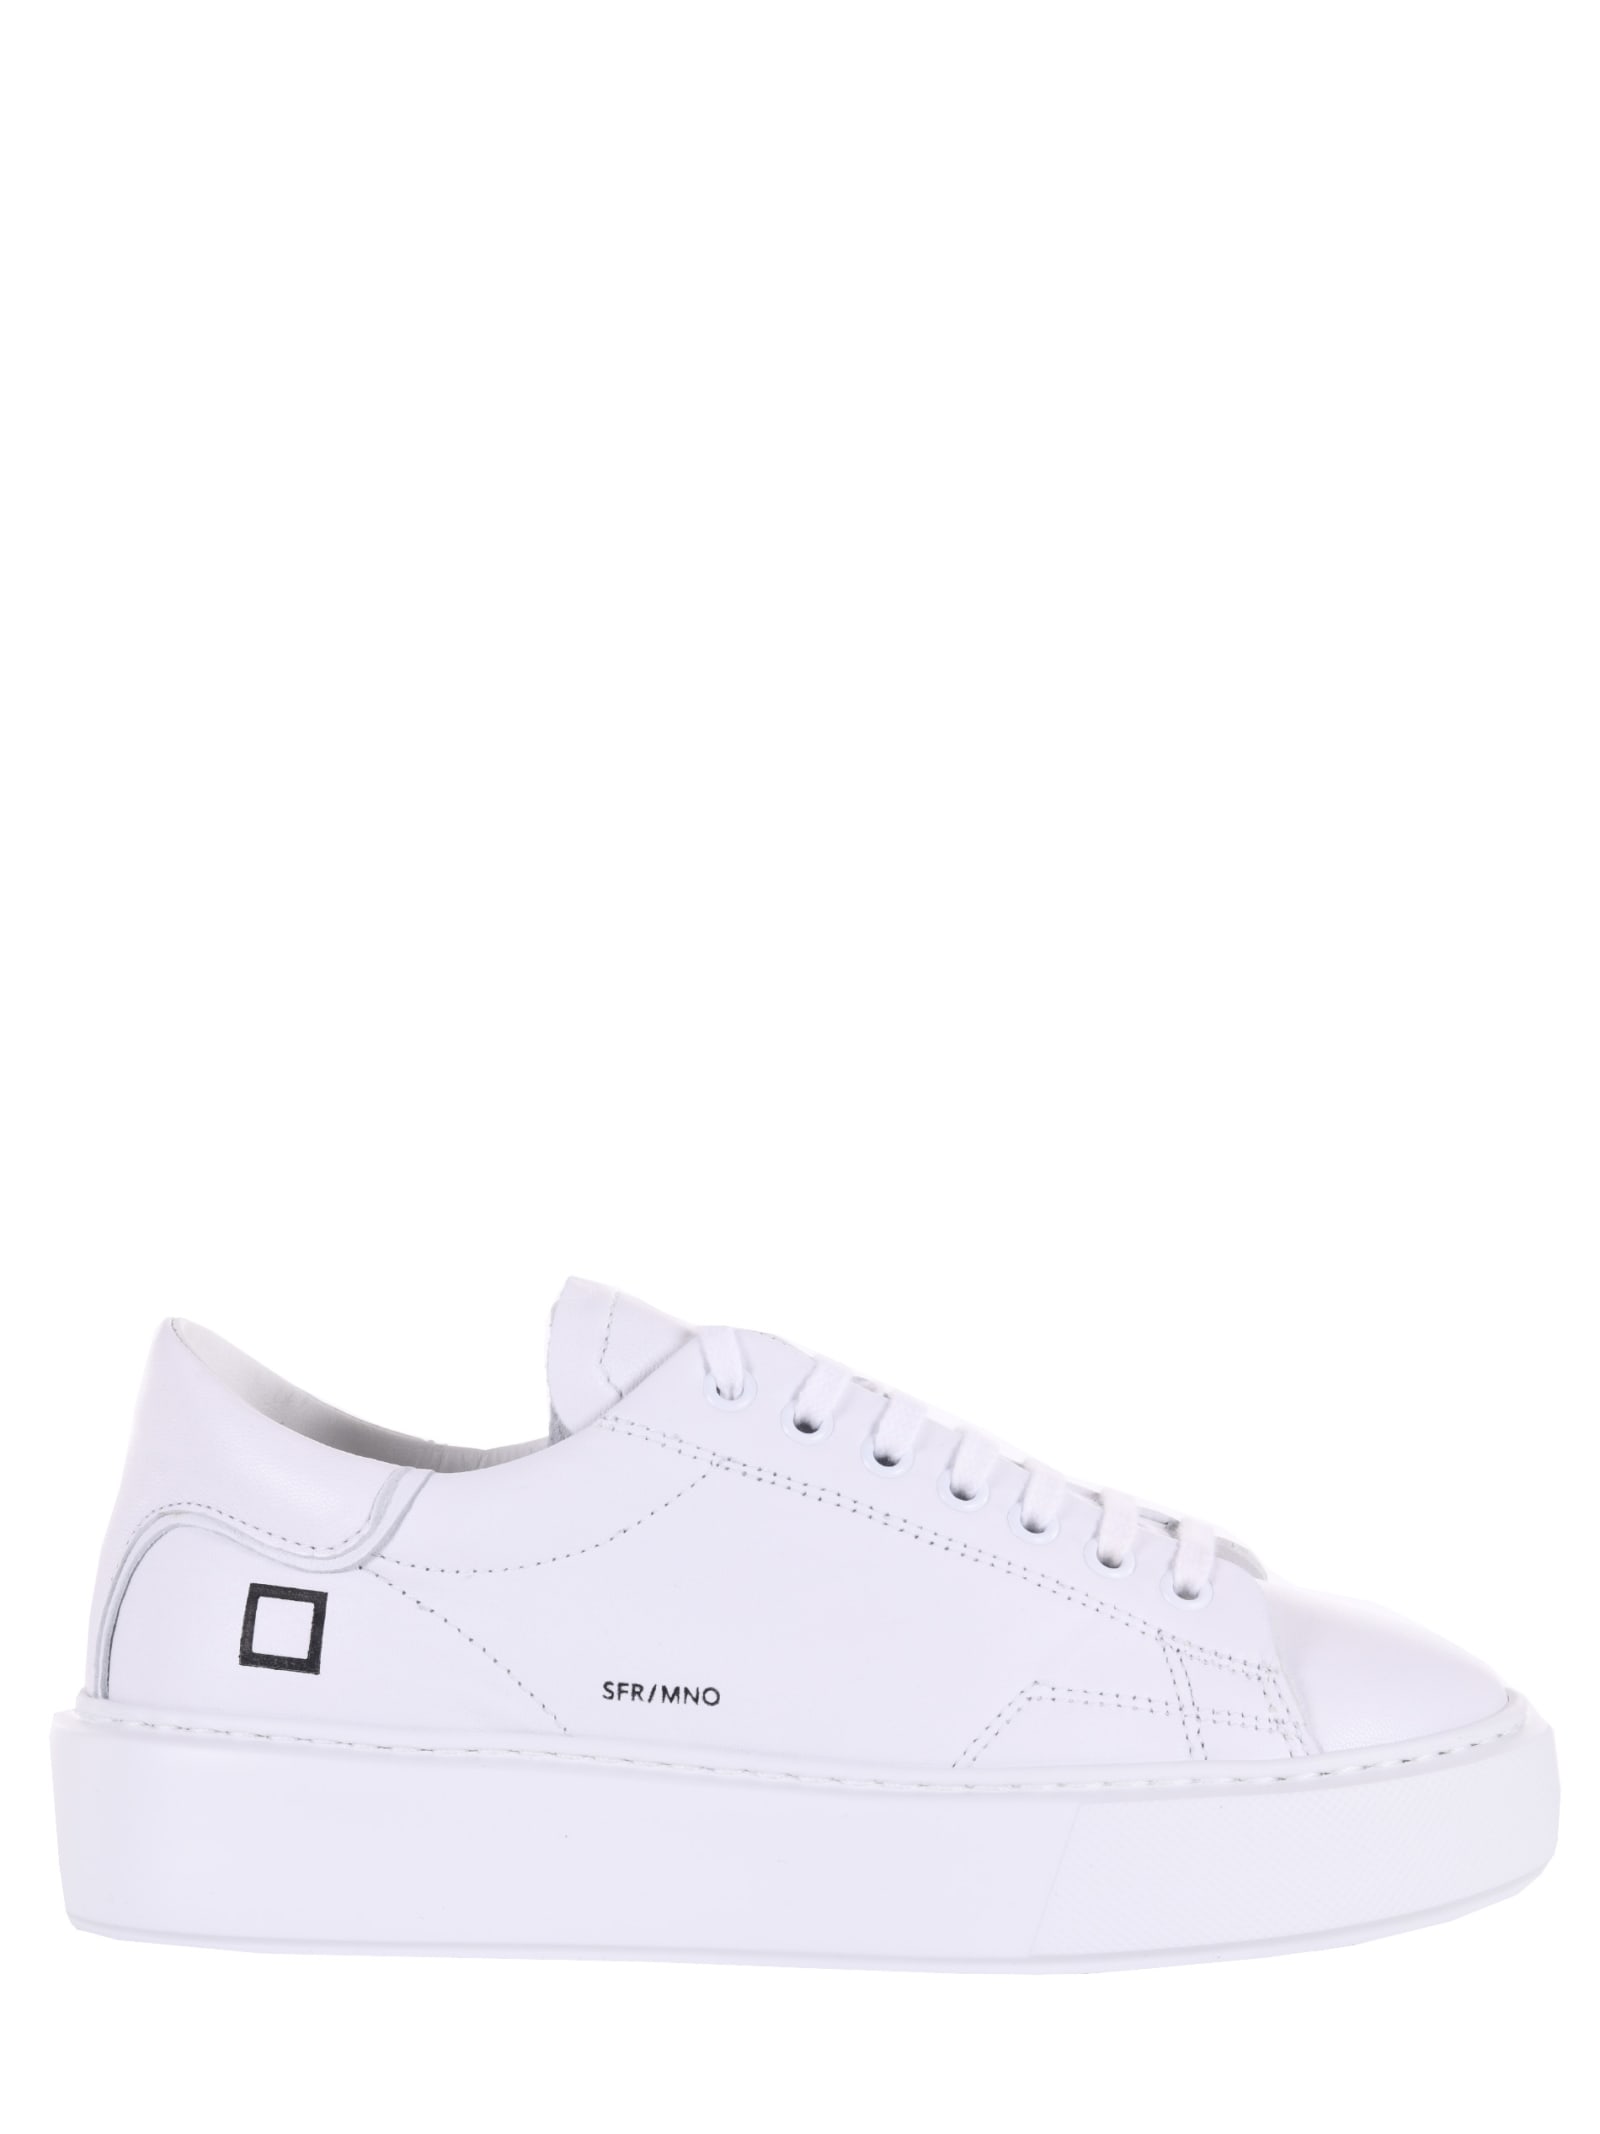 Must Have Sneakers D.a.t.e. sfera Mono In Pelle from D.A.T.E ...